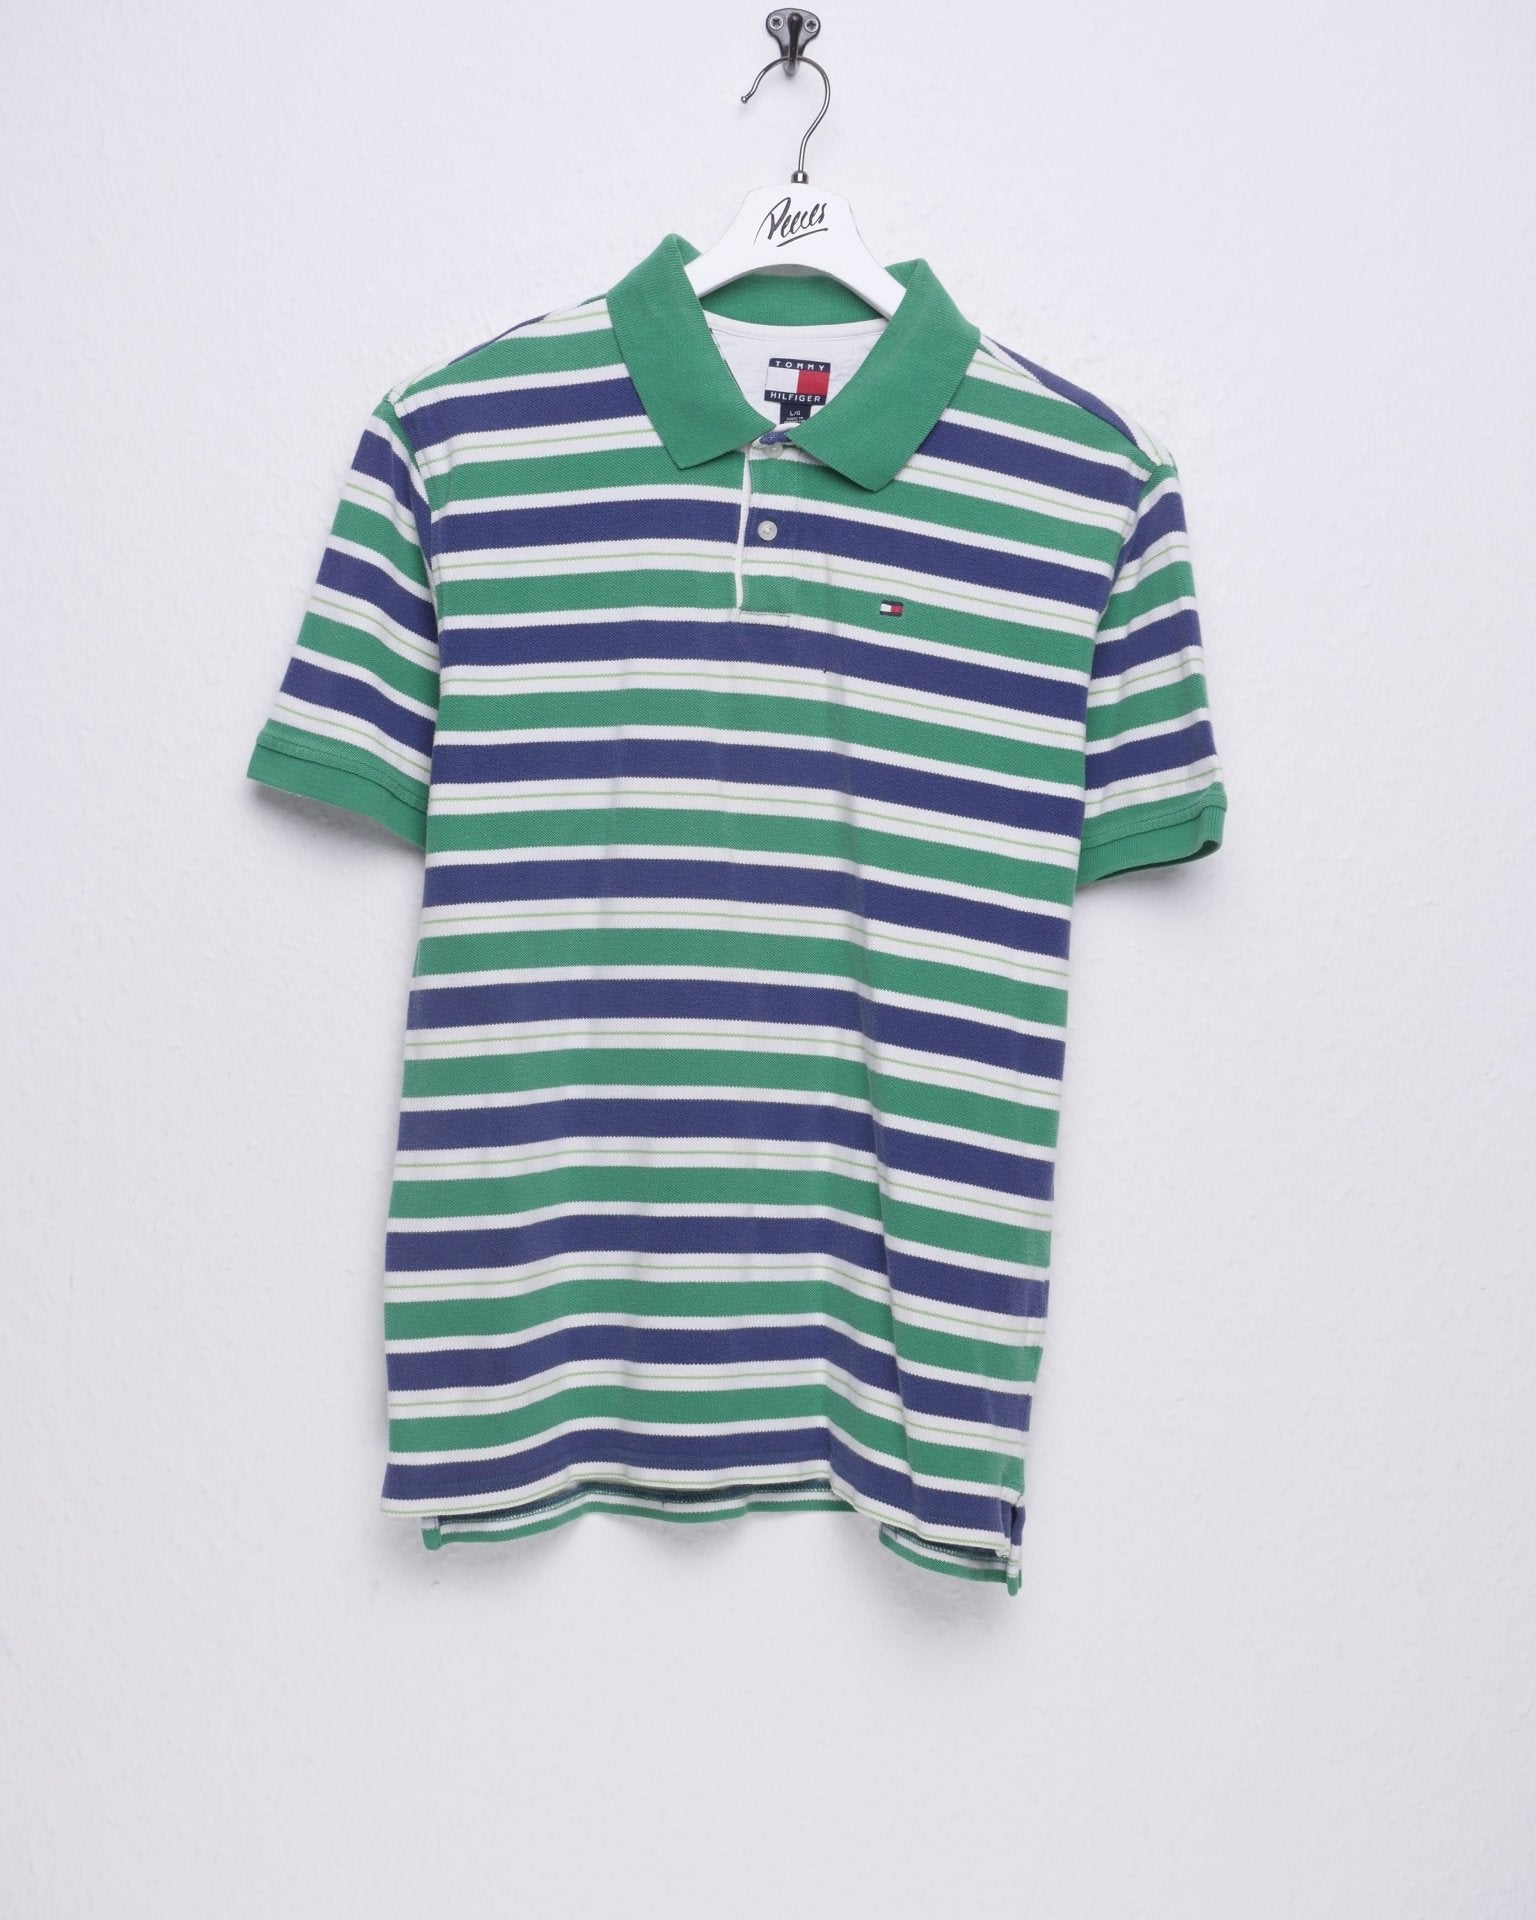 Tommy Hilfiger embroidered Logo striped Polo Shirt - Peeces